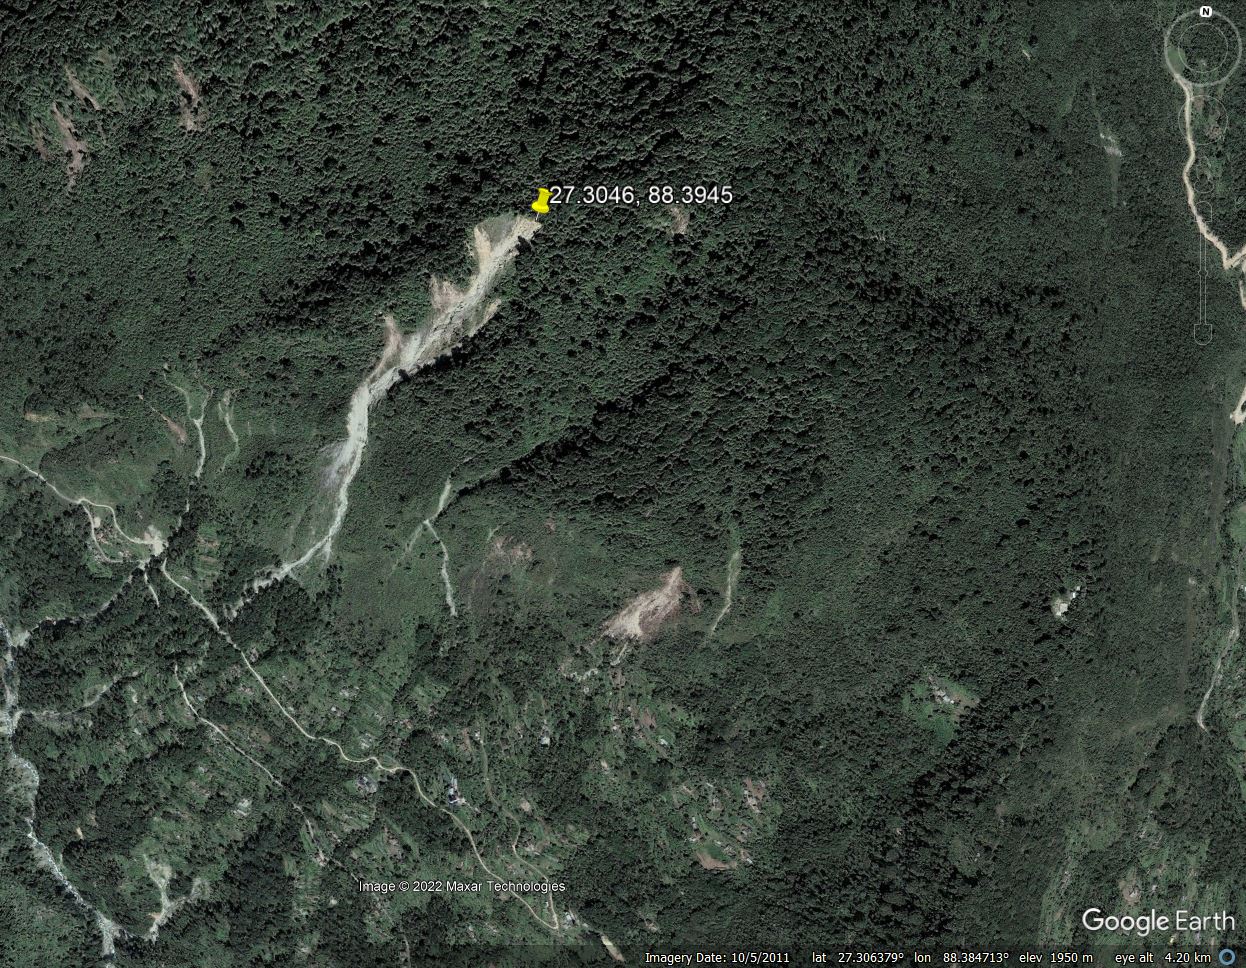 Google Earth image of the Gaguney landslide in India, collected in 2011.